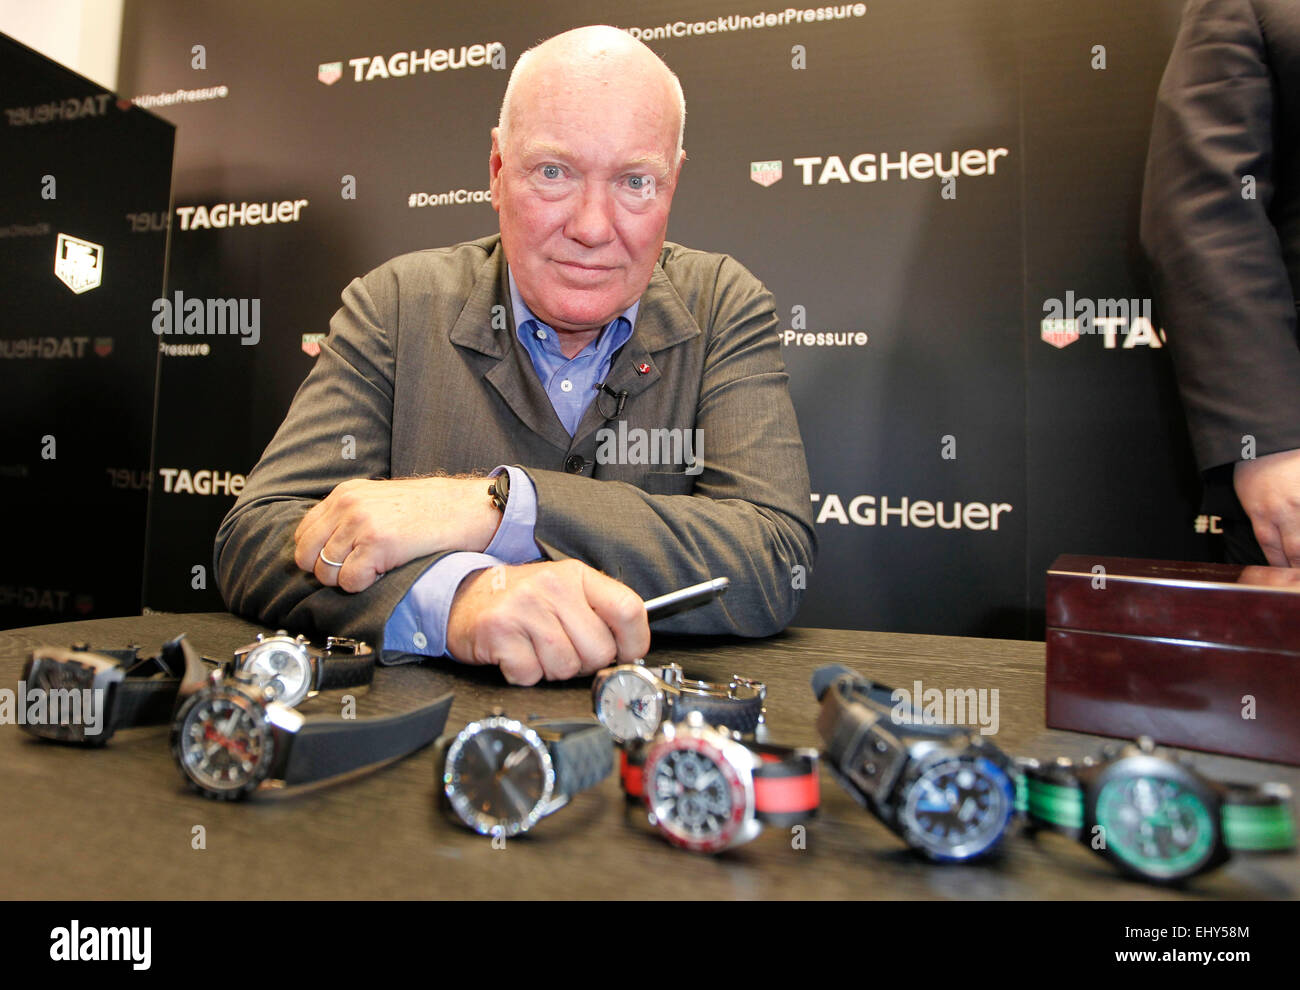 Basel, Switzerland - March 18, 2015: Jean Claude Biver, CEO of Hublot,  Zenith and Tag Heuer (LVMH) at Baselworld 2015, the biggest Watch and  Jewellery Fair in the World from 19-26 March.